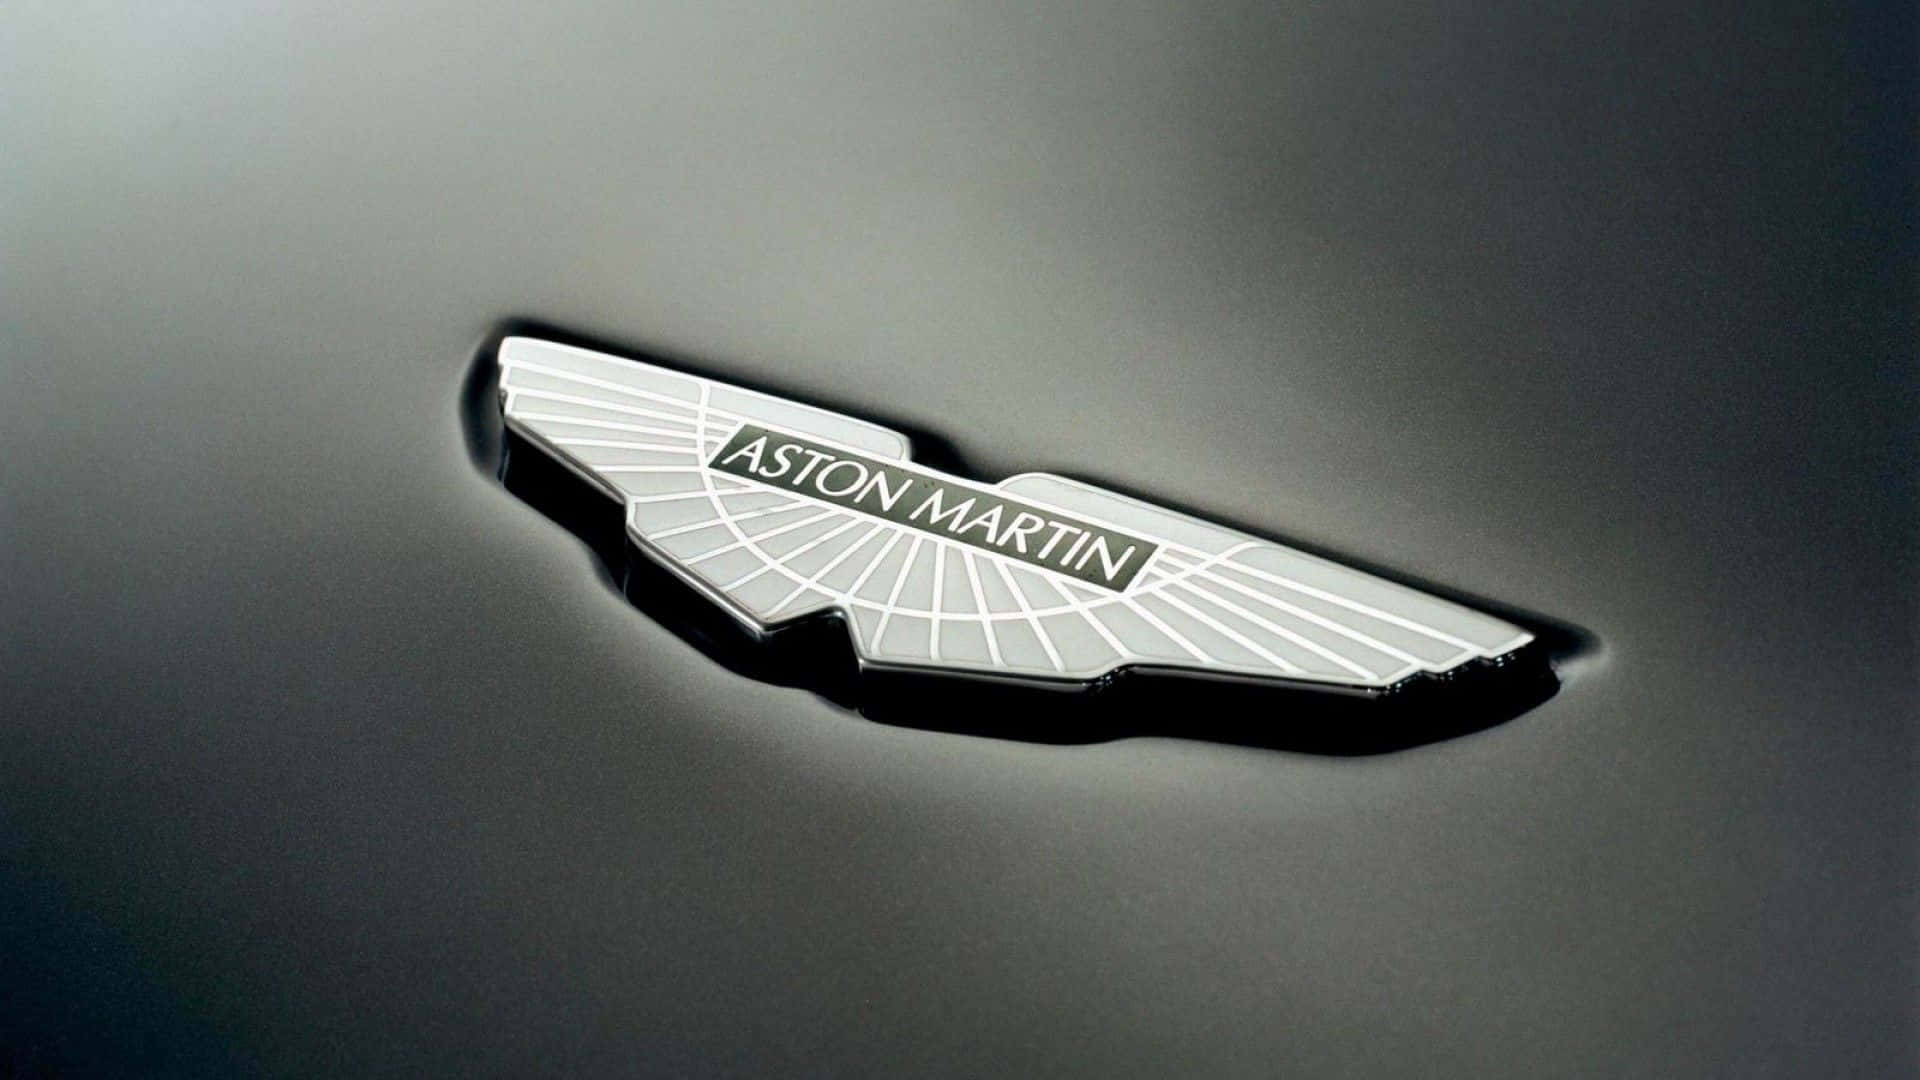 "Experience Power, Performance, and Prestige with an Aston Martin"